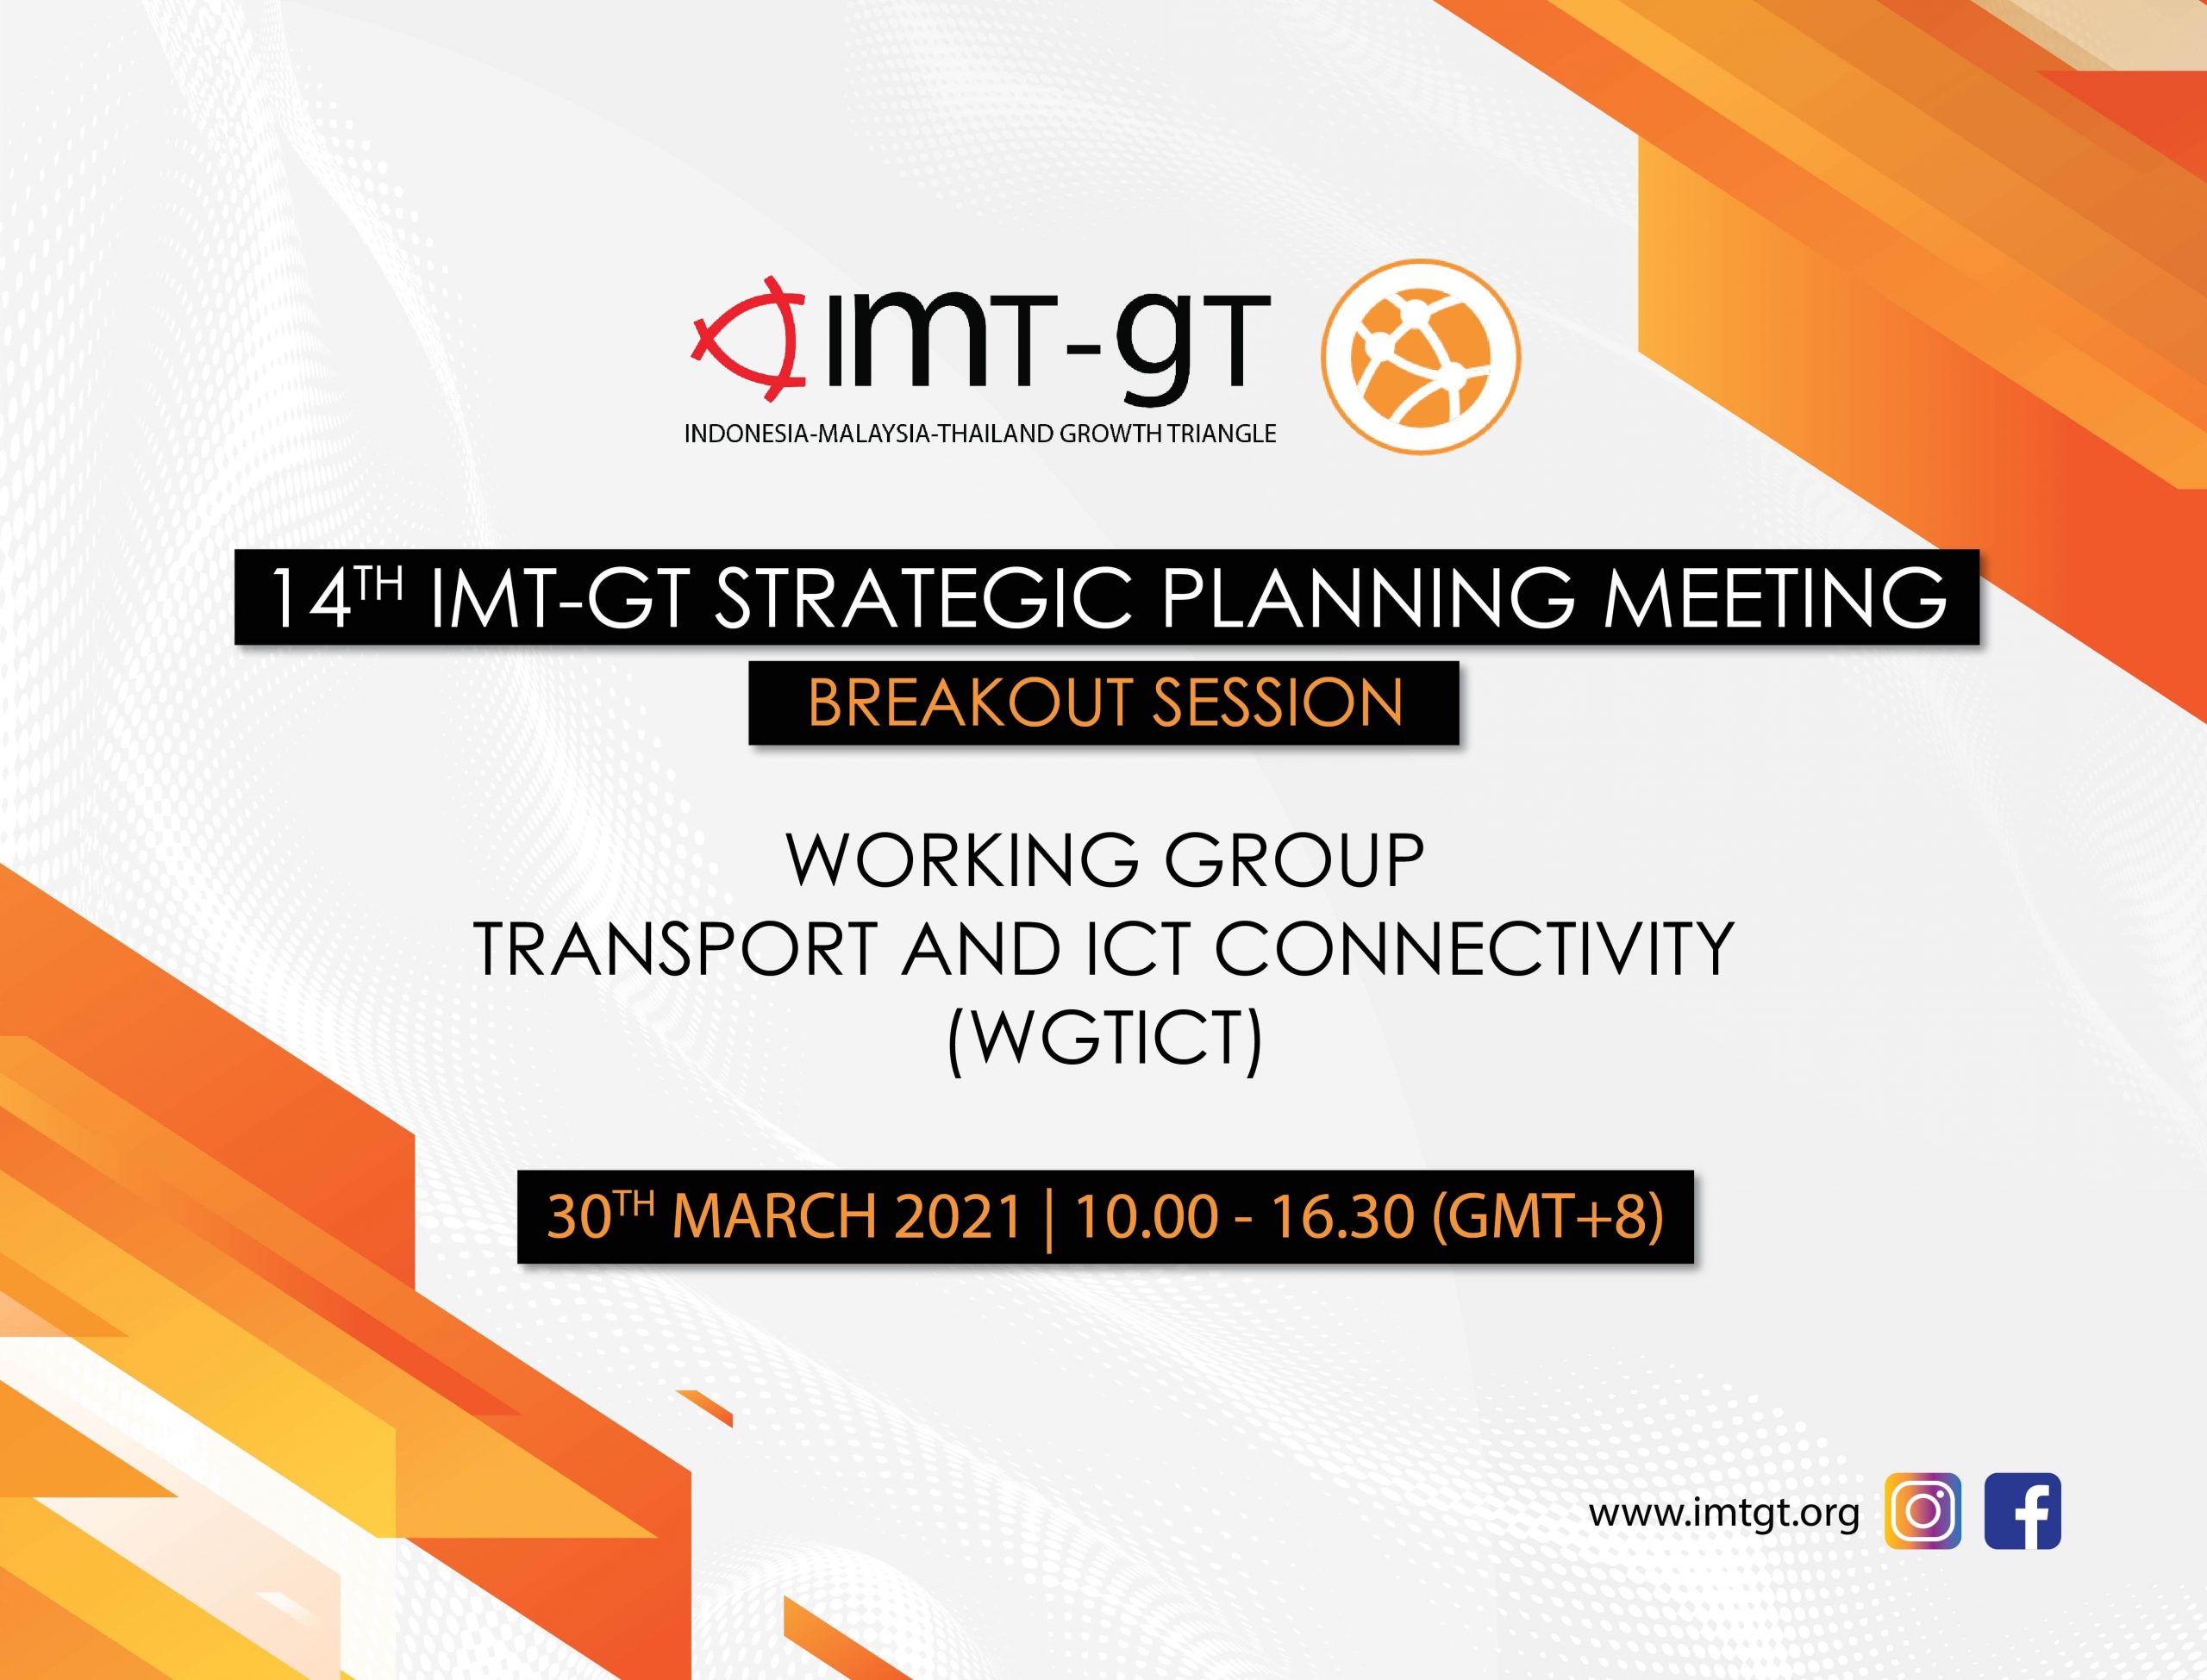  14TH IMT-GT SPM BREAKOUT SESSION - SWGICT